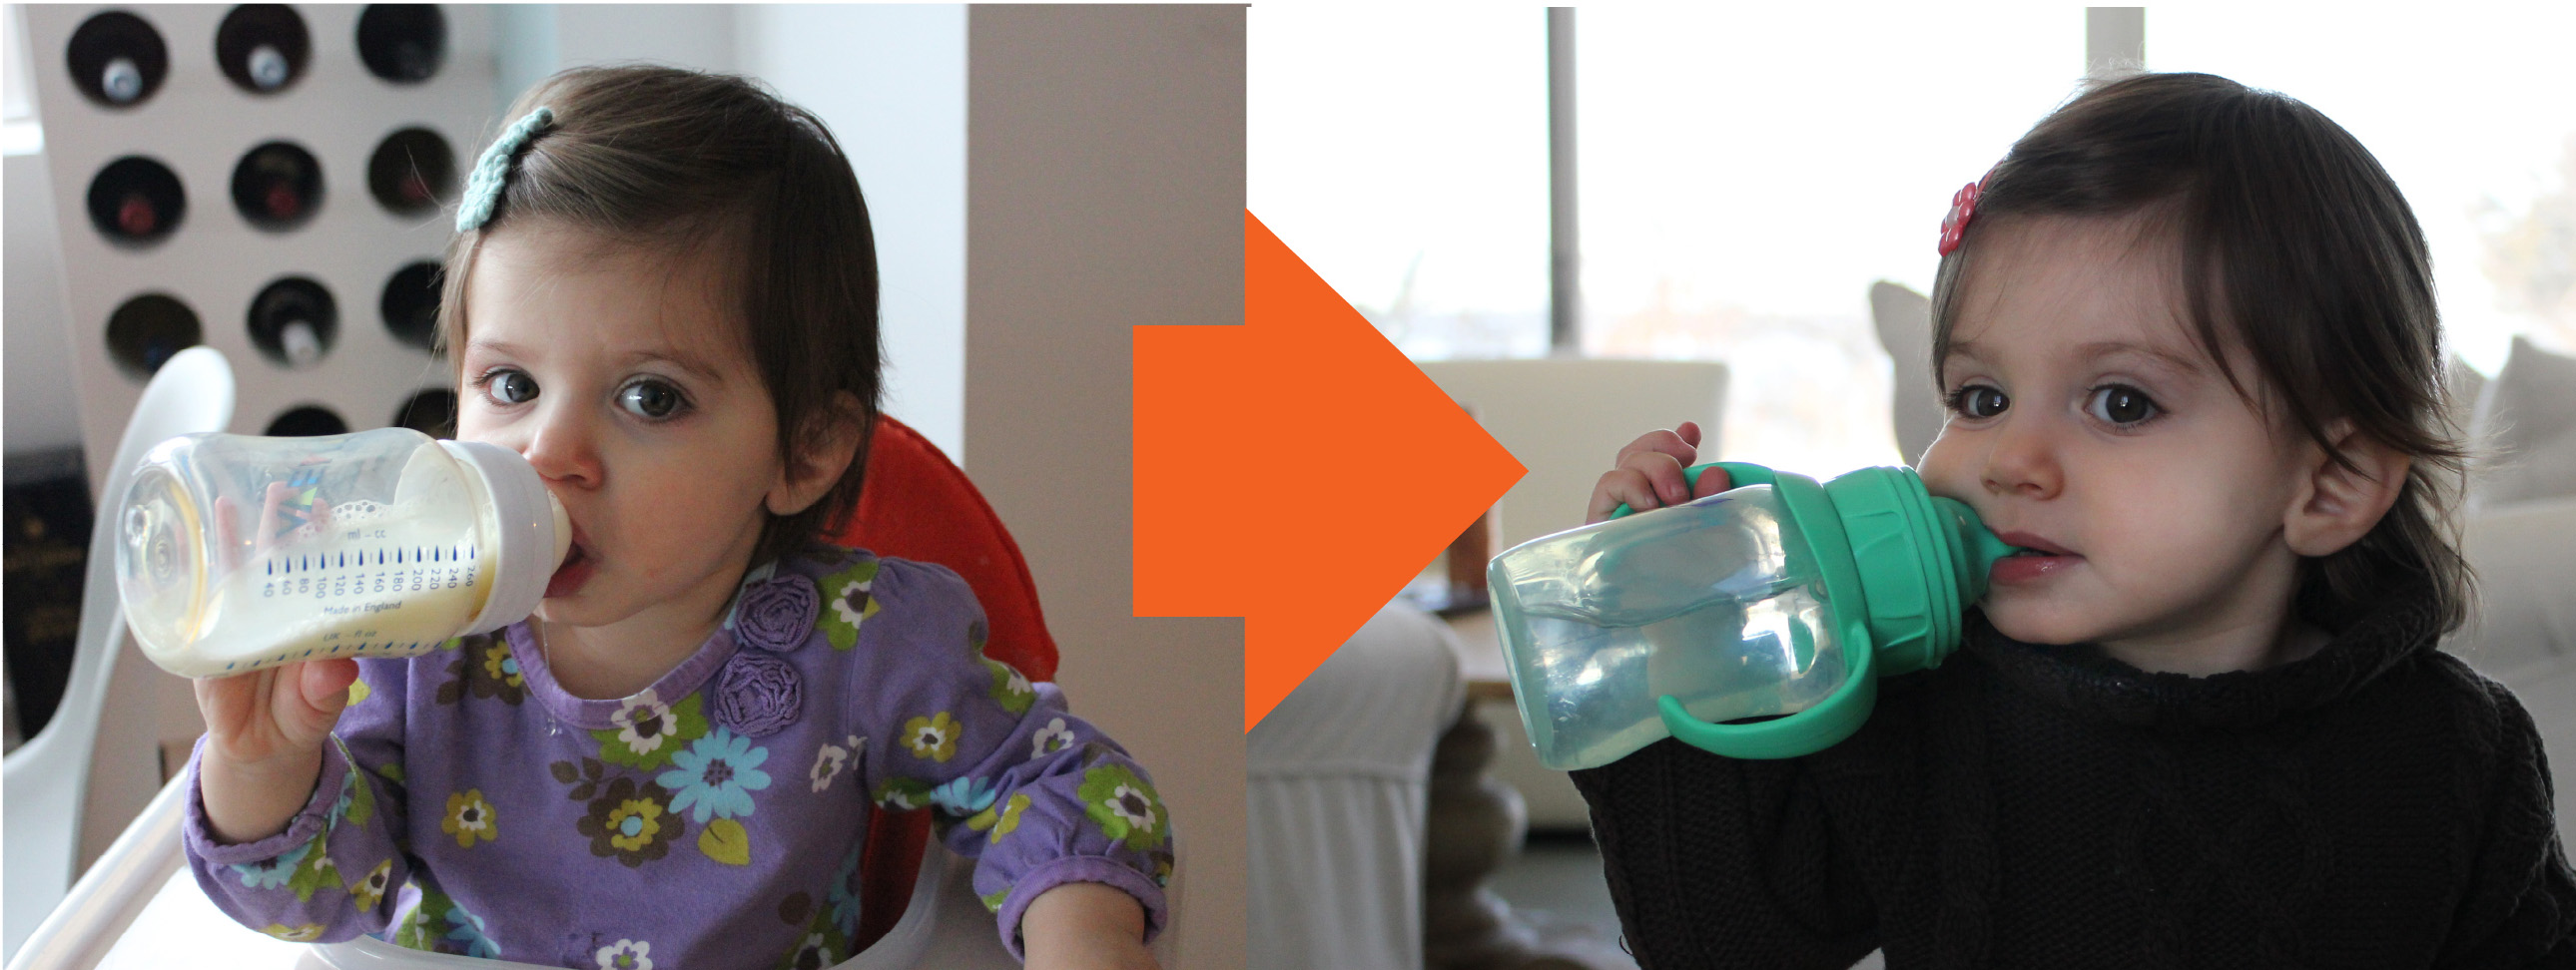 From Bottle to Cup: Helping Your Child Make a Healthy Transition 